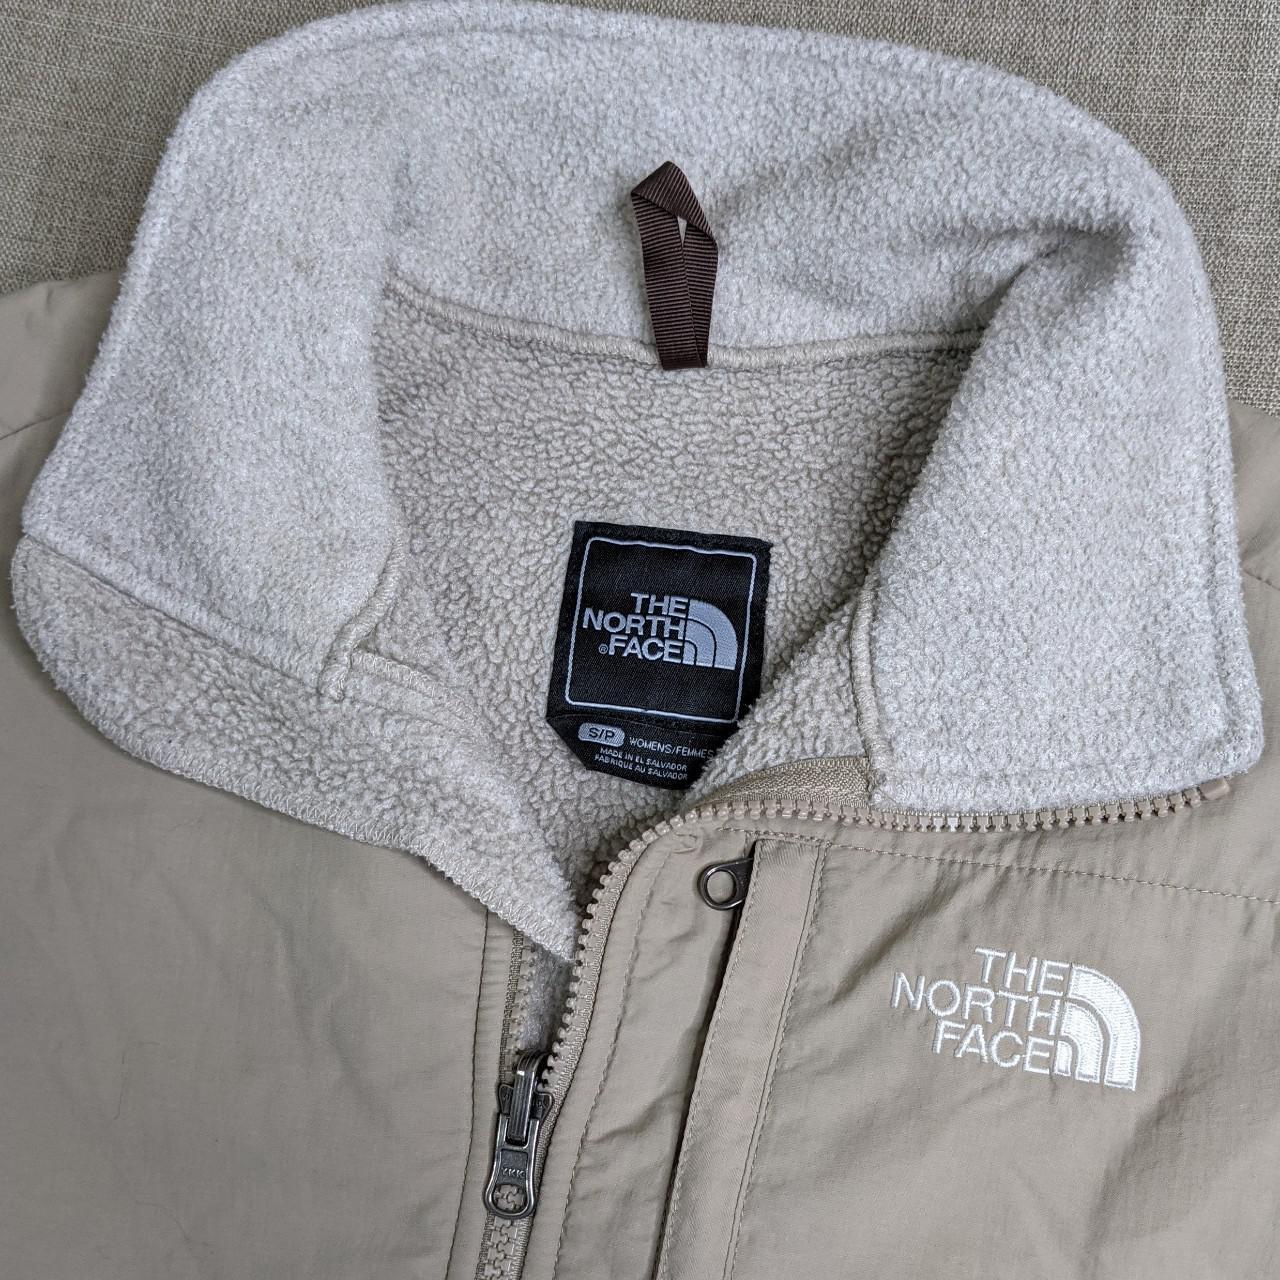 The North Face Women's Cream and Tan Jacket (3)